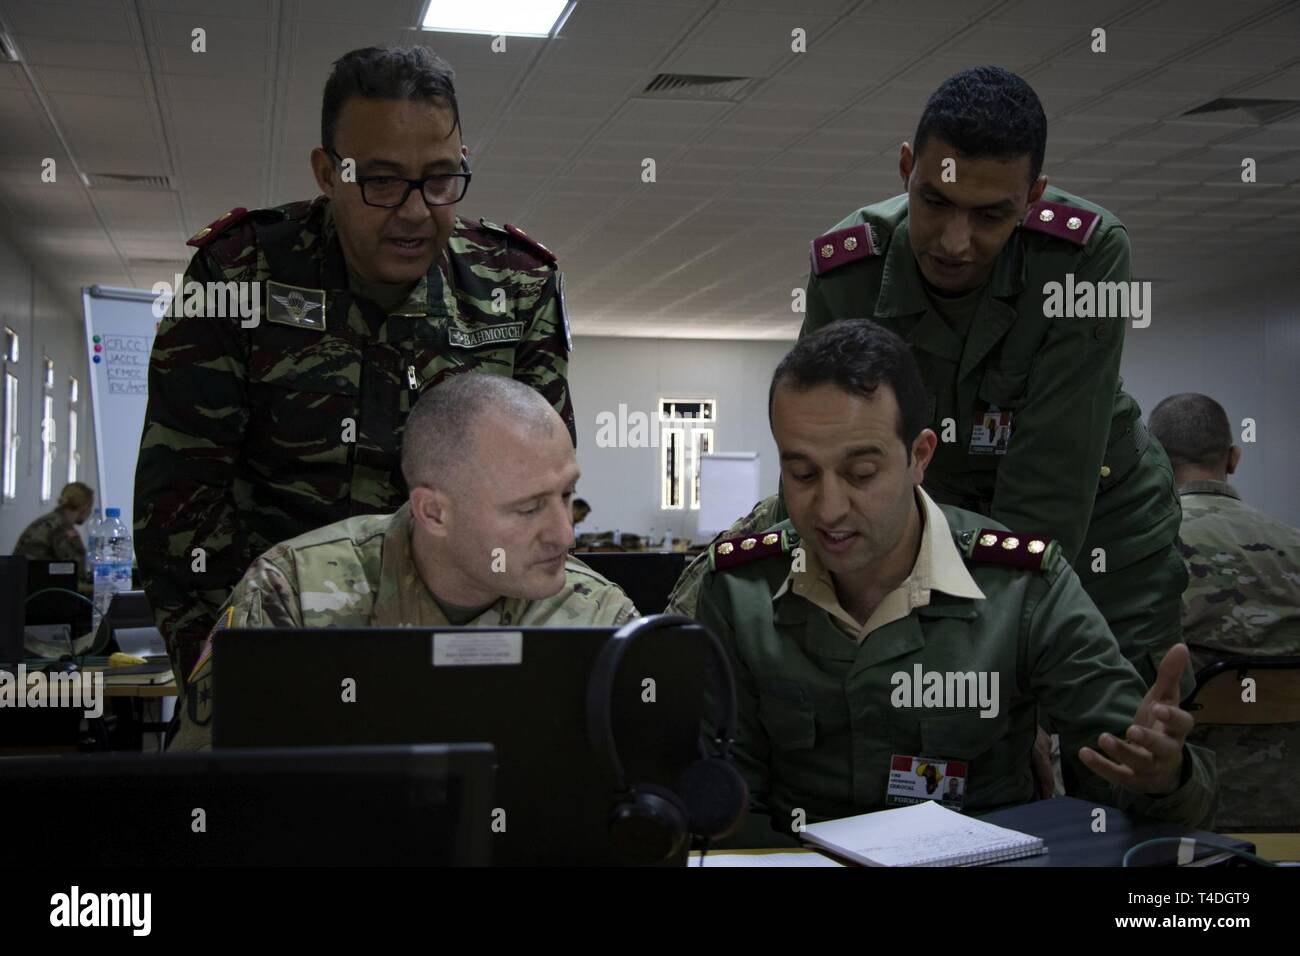 U.S. Army Soldier assigned to U.S. Army Africa and his Royal Moroccan Armed Forces counterparts discuss medical planning during exercise African Lion 2019, at the Southern Zone Headquarters in Agadir, Morocco, March 25, 2019. Participation in this multinational exercise enhances professional relationships and builds interoperability of forces. The U.S. deployed approximately 1,100 U.S. service members to join nearly 1,000 Royal Moroccan Armed Forces, approximately 250 Tunisian Armed Forces, and armed forces participants in from Canada, France, Senegal, Spain, and the United Kingdom Stock Photo